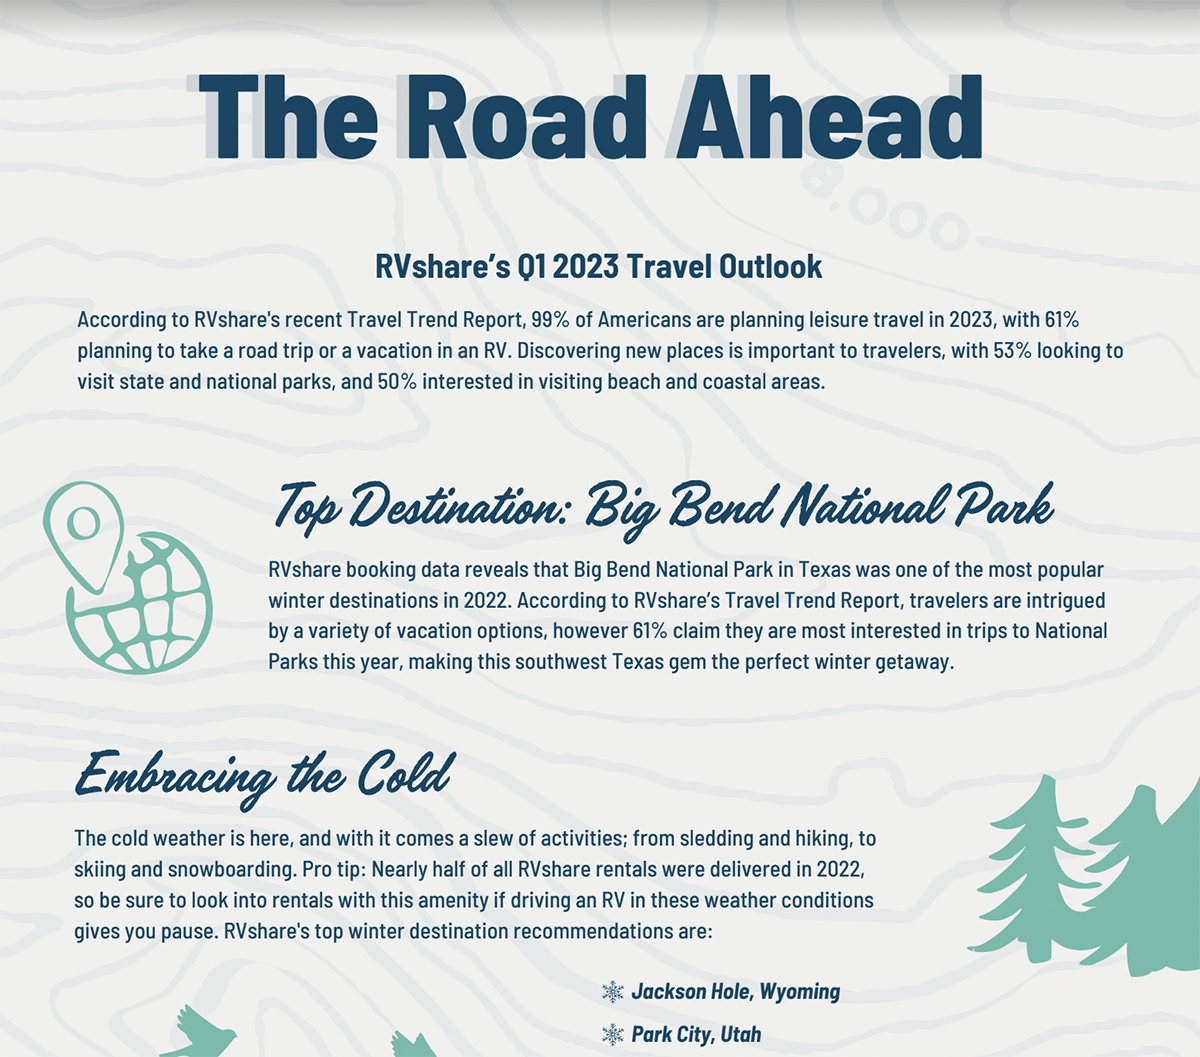 RVshare Launches ‘The Road Ahead’ to Inspire Travelers